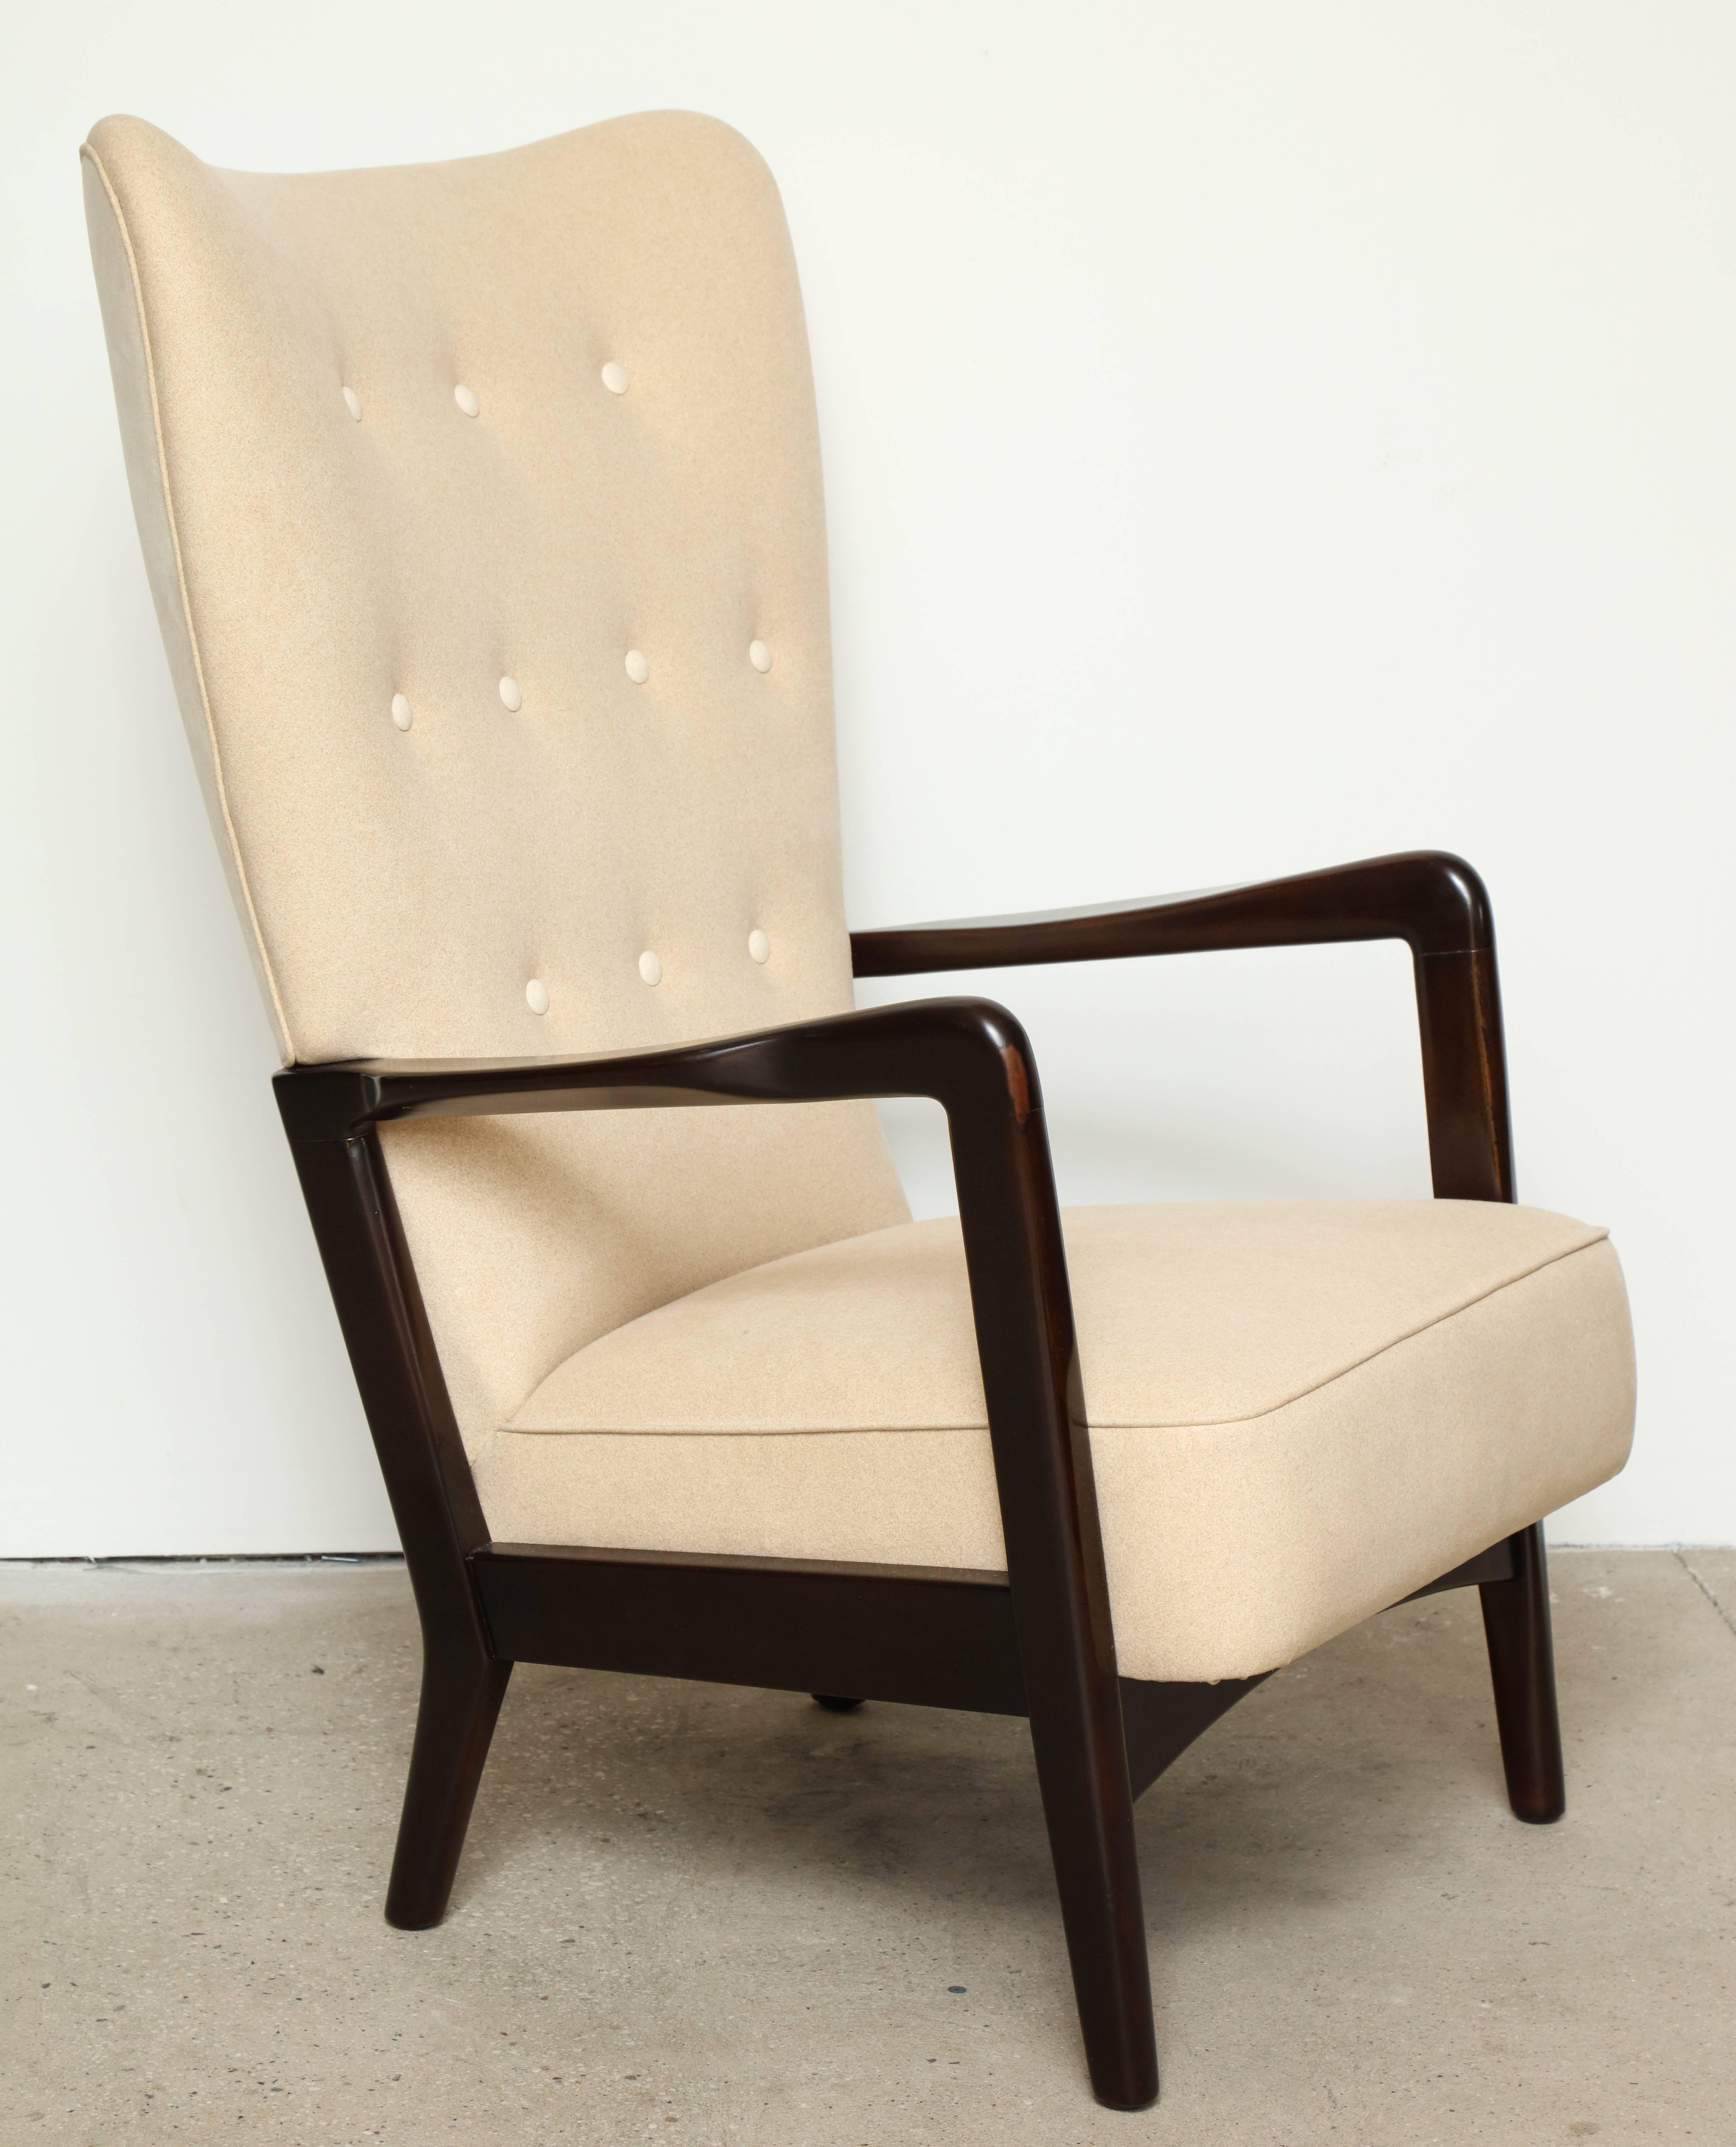 Soren Hansen armchair for Fritz Hansen upholstered in flannel suede circa 1950, contrast back and covered buttons.